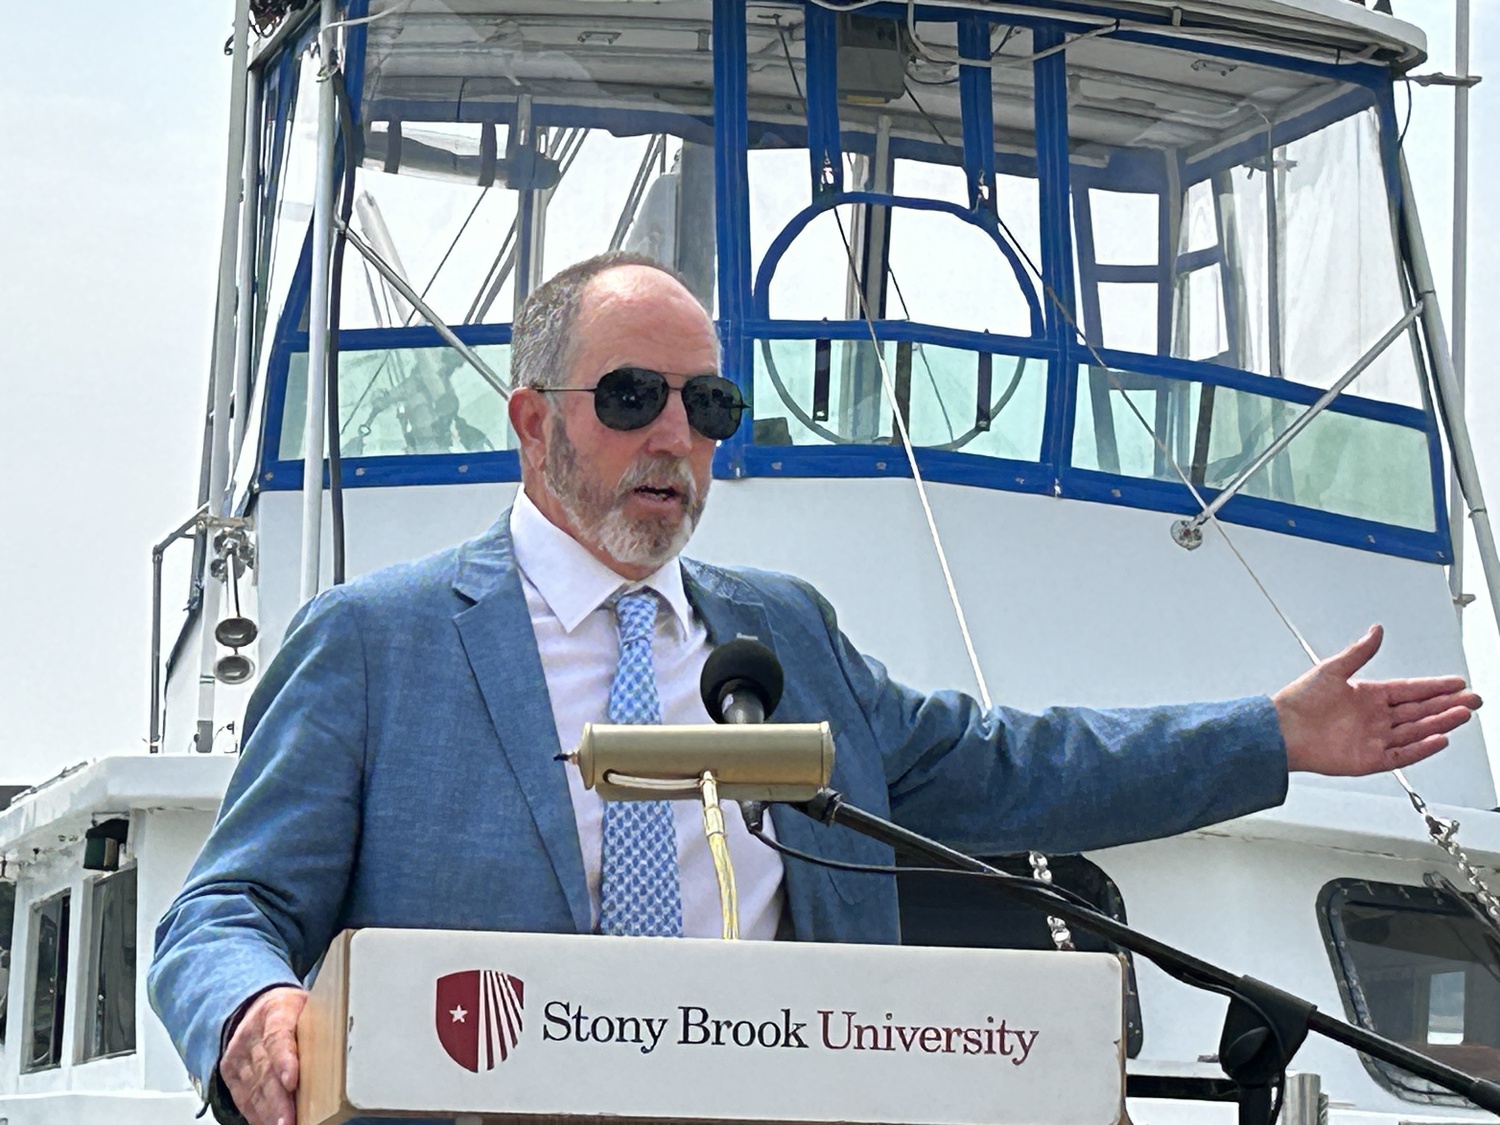 Southampton Town Trustee Edward Warner, Jr. spoke of the value in collaborating with all stakeholders to enhance the quality of Shinnecock Bay.   KITTY MERRILL